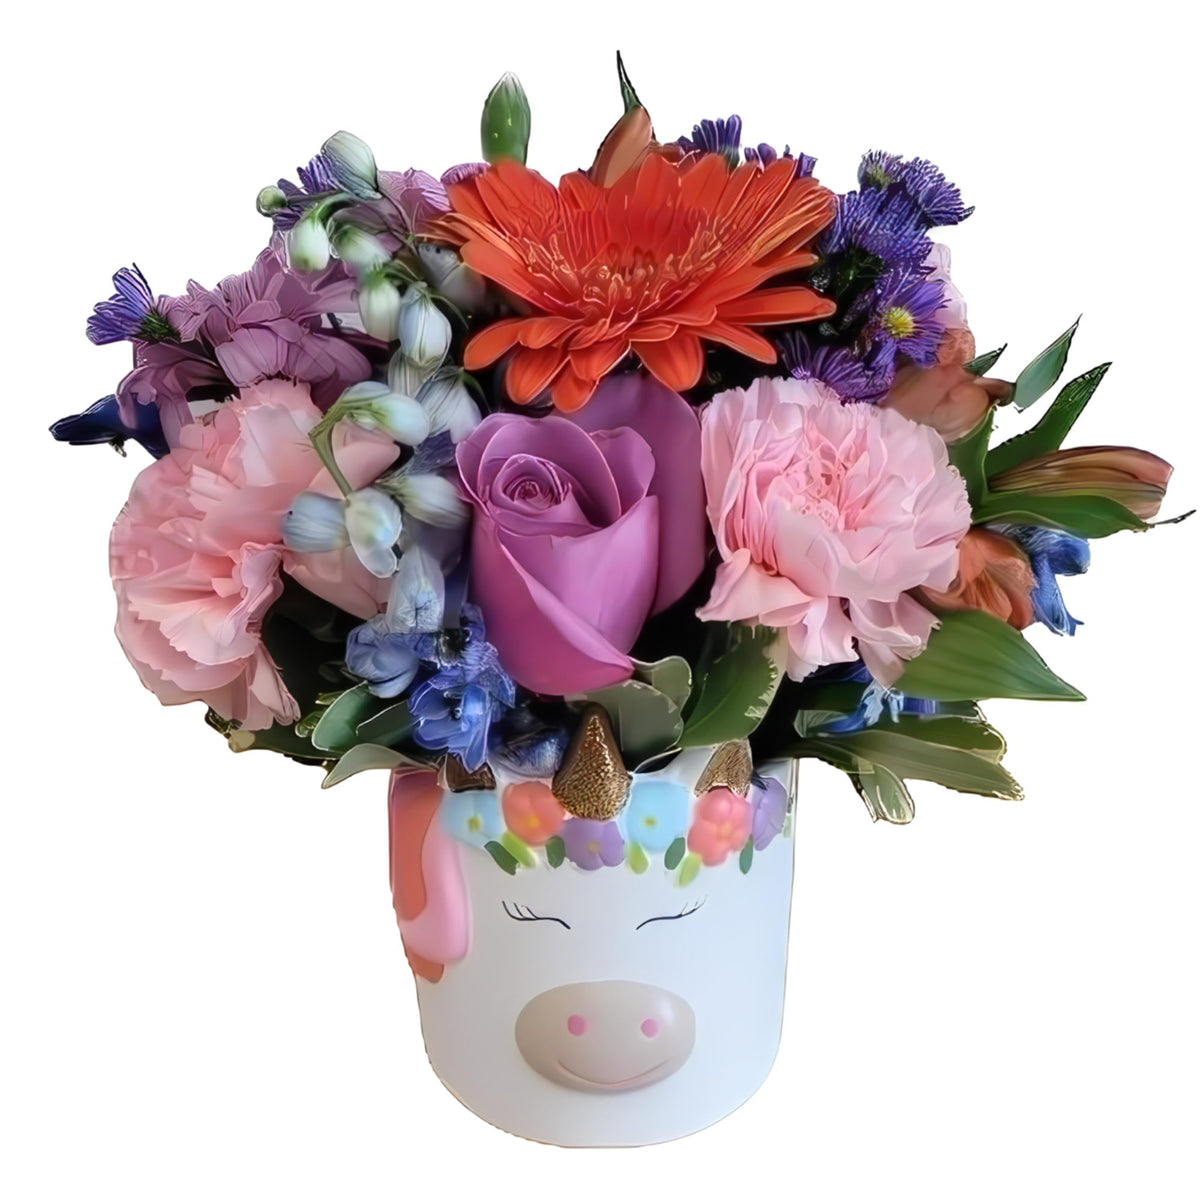 Unicorn Floral Fantasy Floral Arrangement by Queens Flower Delivery features a unicorn vase with a floral blast of color.